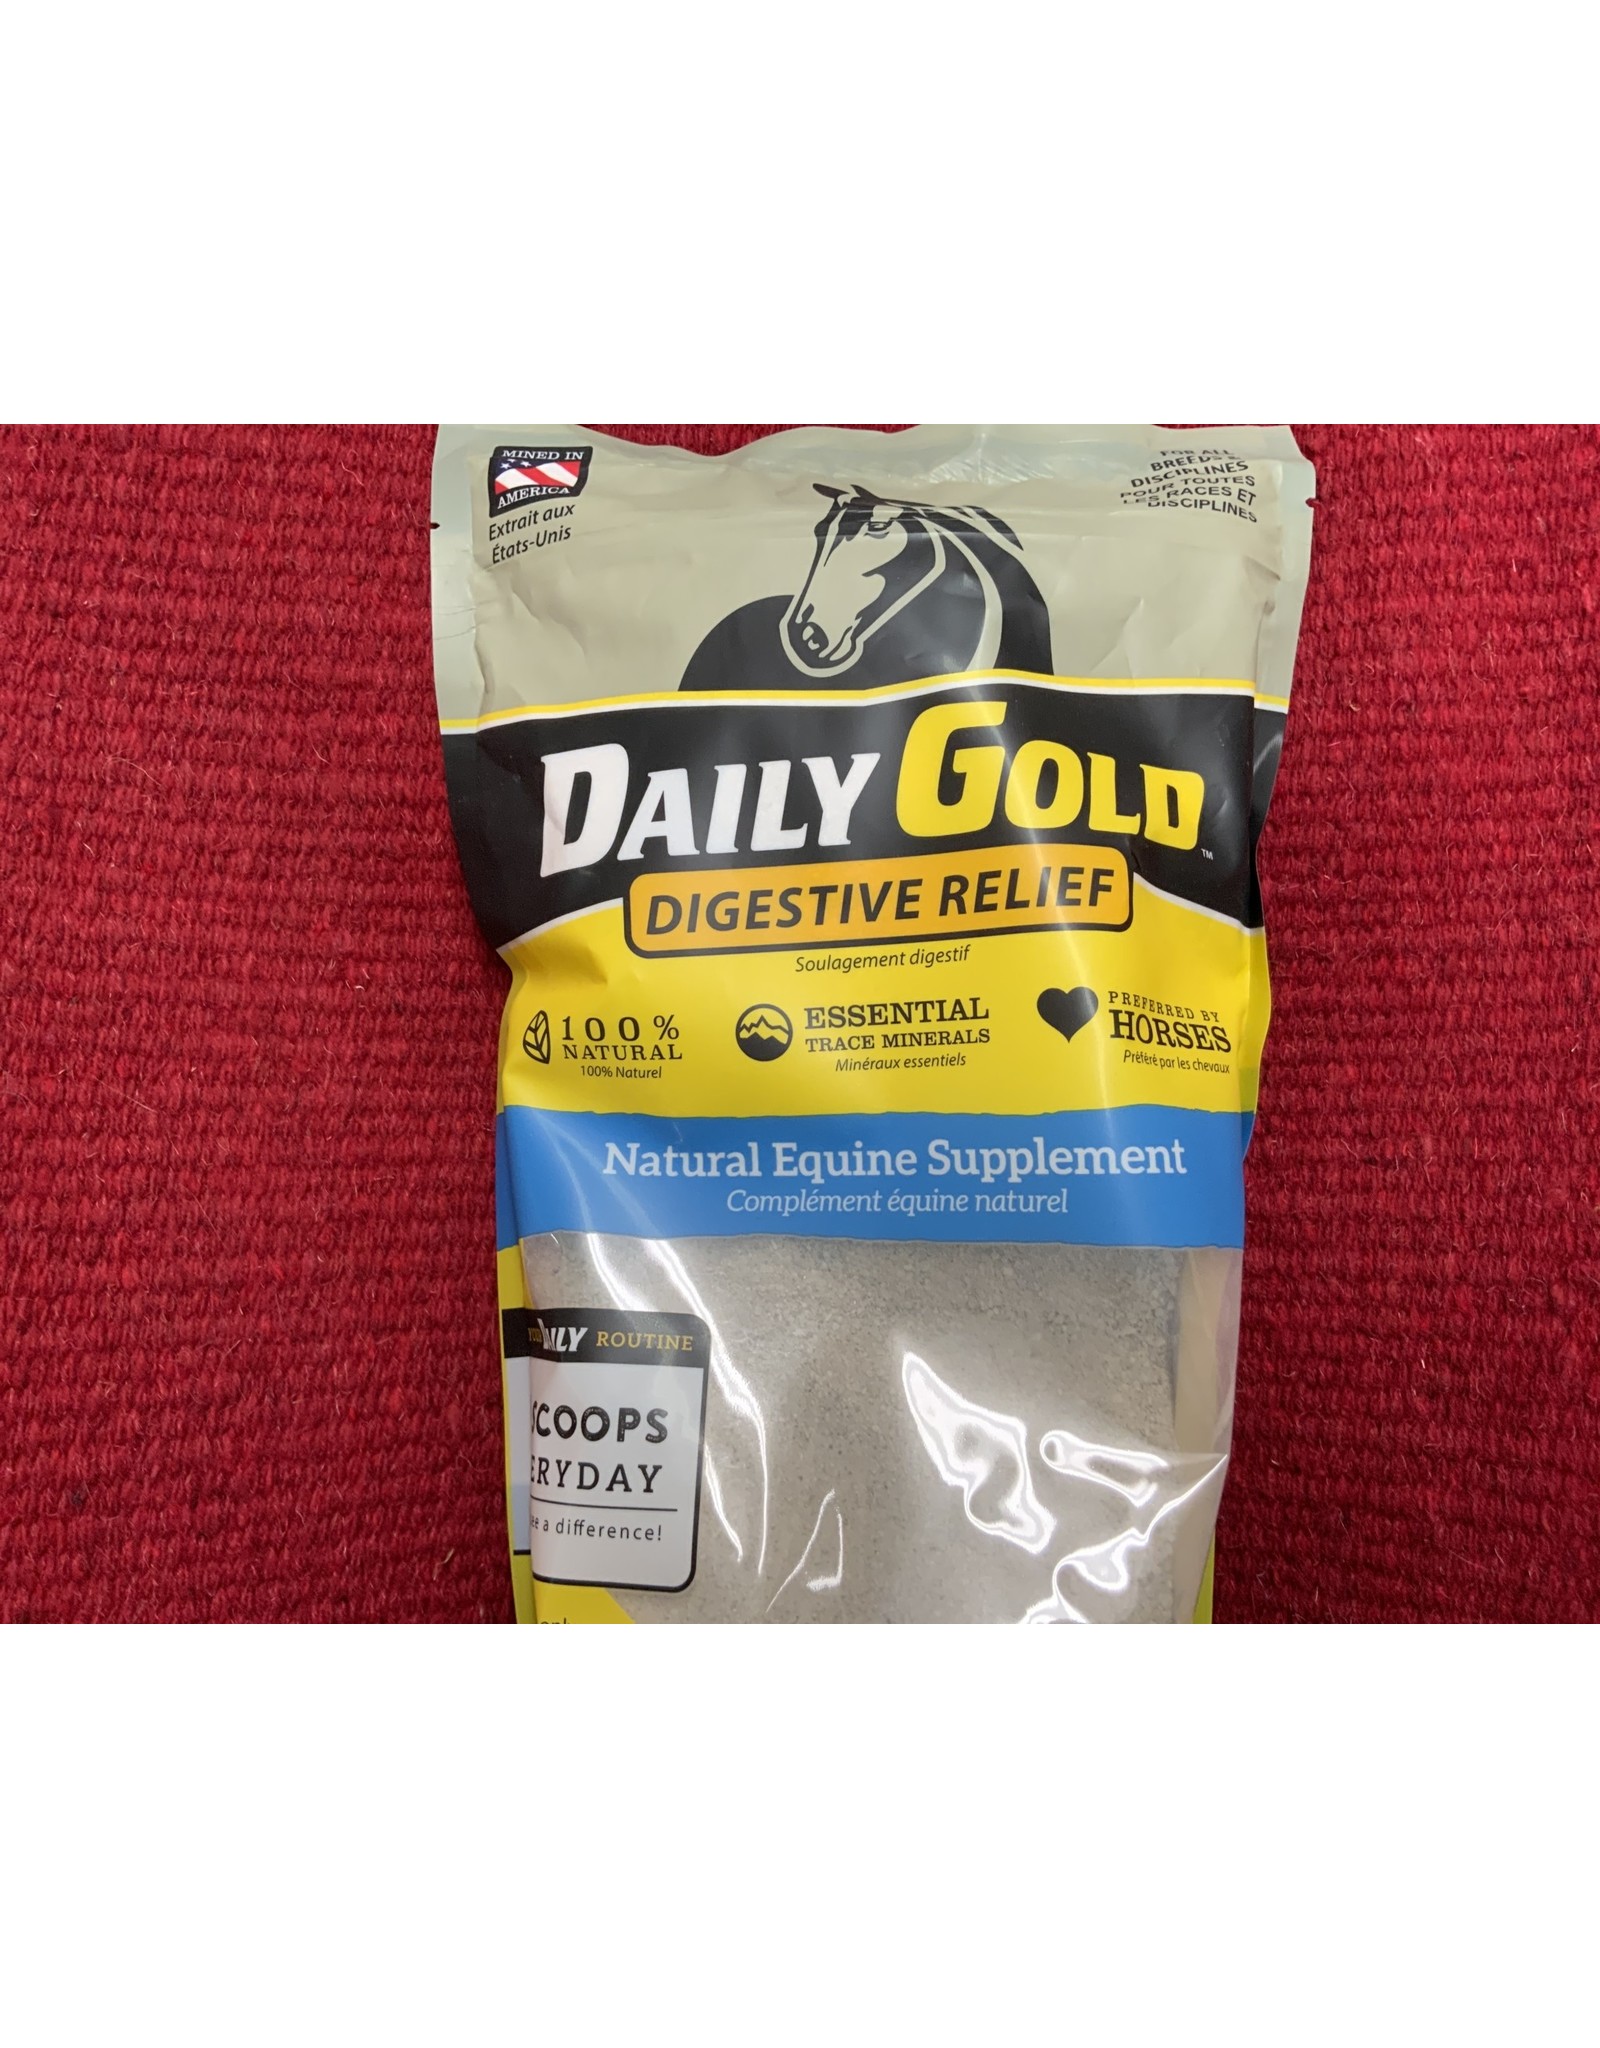 Daily Gold 4.5lb V117623 Natural Clay used for Digestive Relief, Gut Support